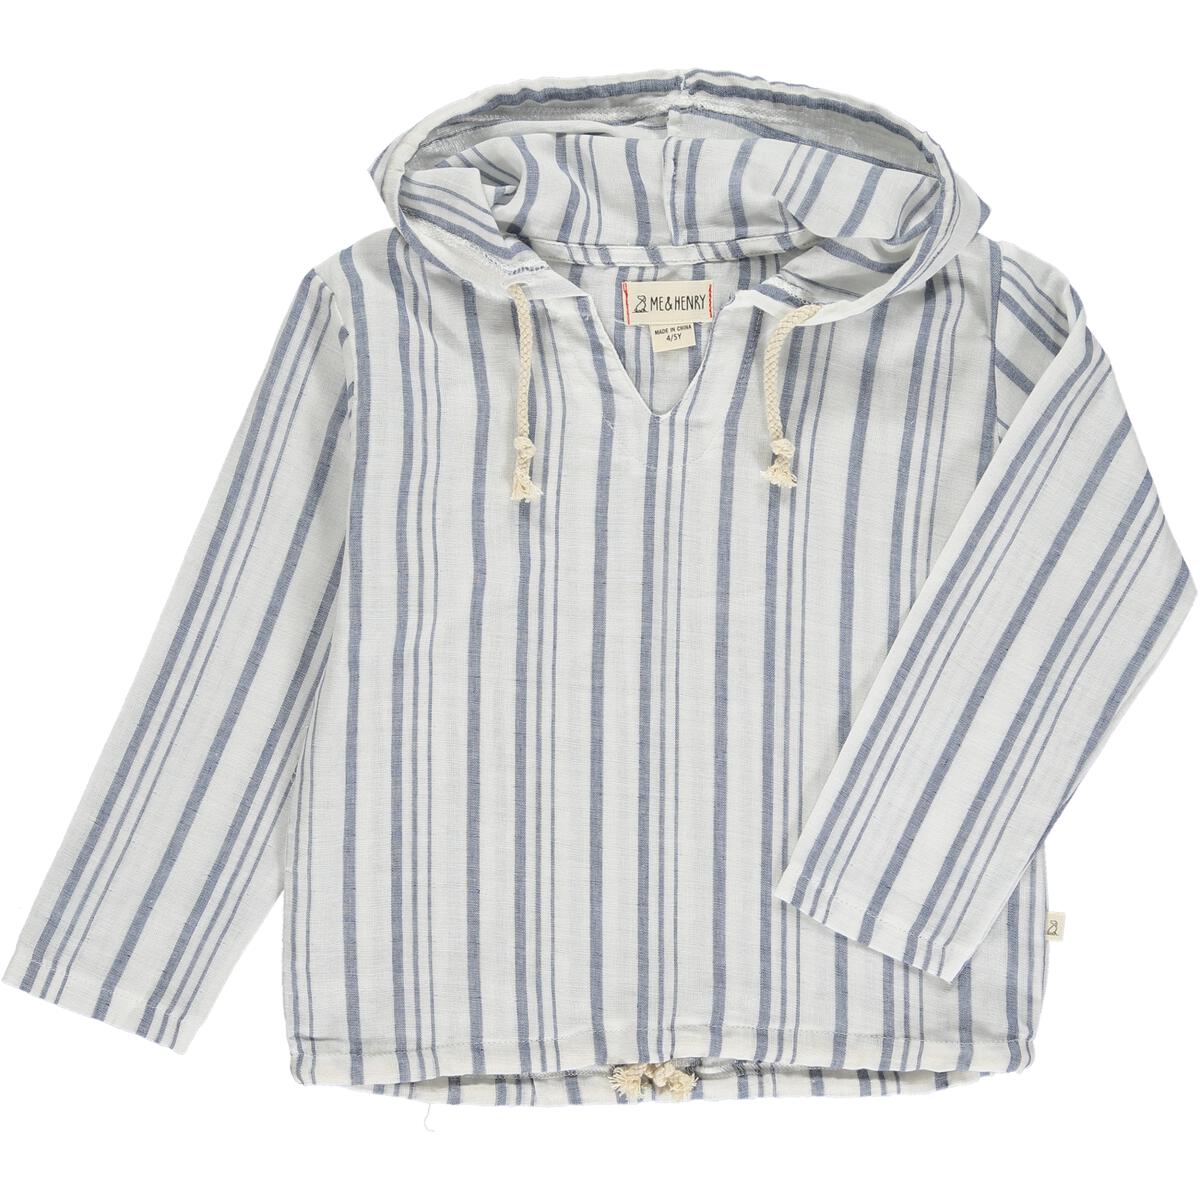 ST. IVES Gauze Hooded Top Kids Sizes Me and Henry